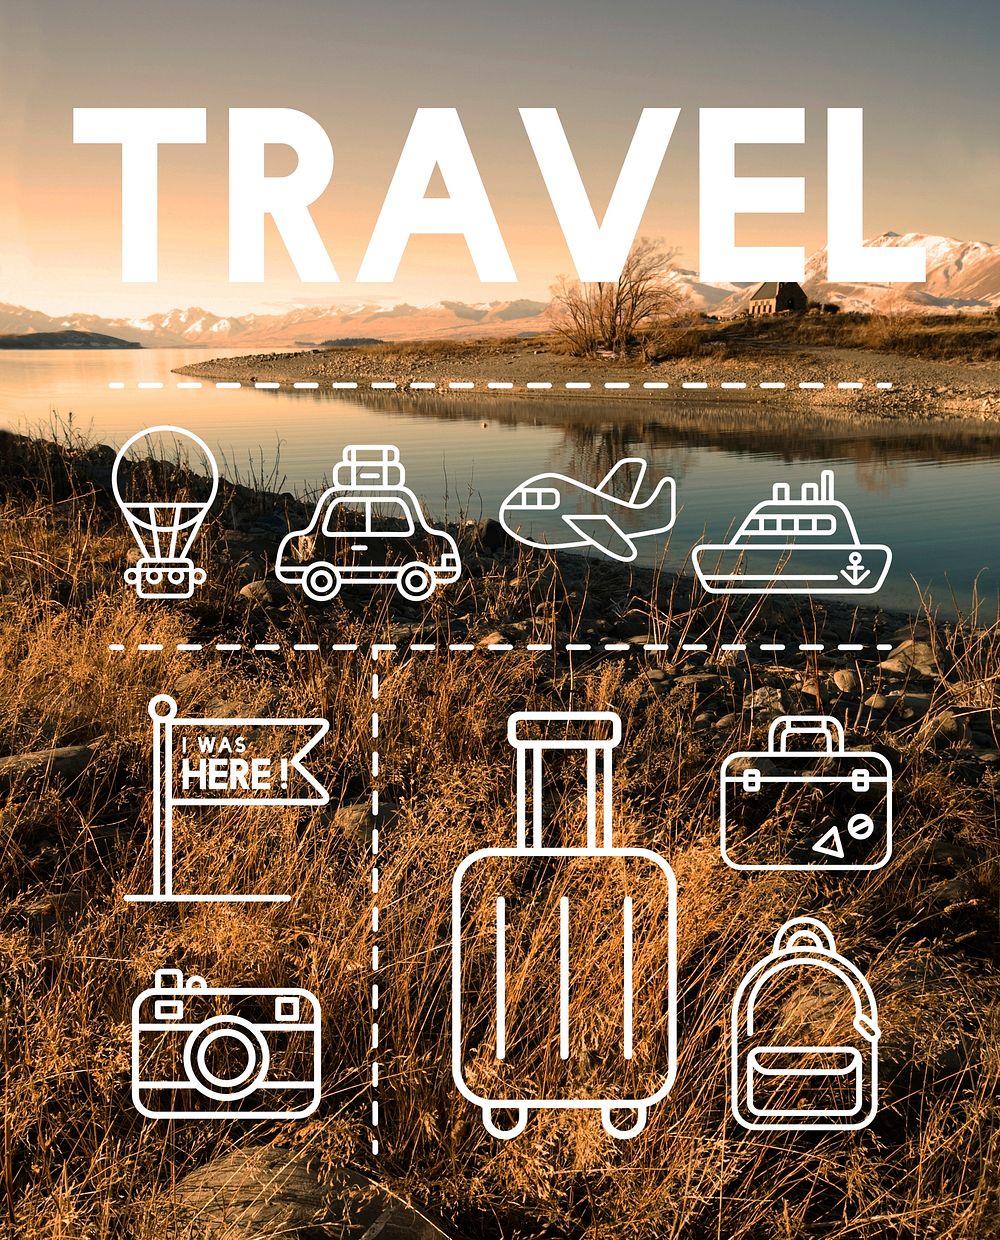 Travel Holiday Journey Exploration Graphic Concept